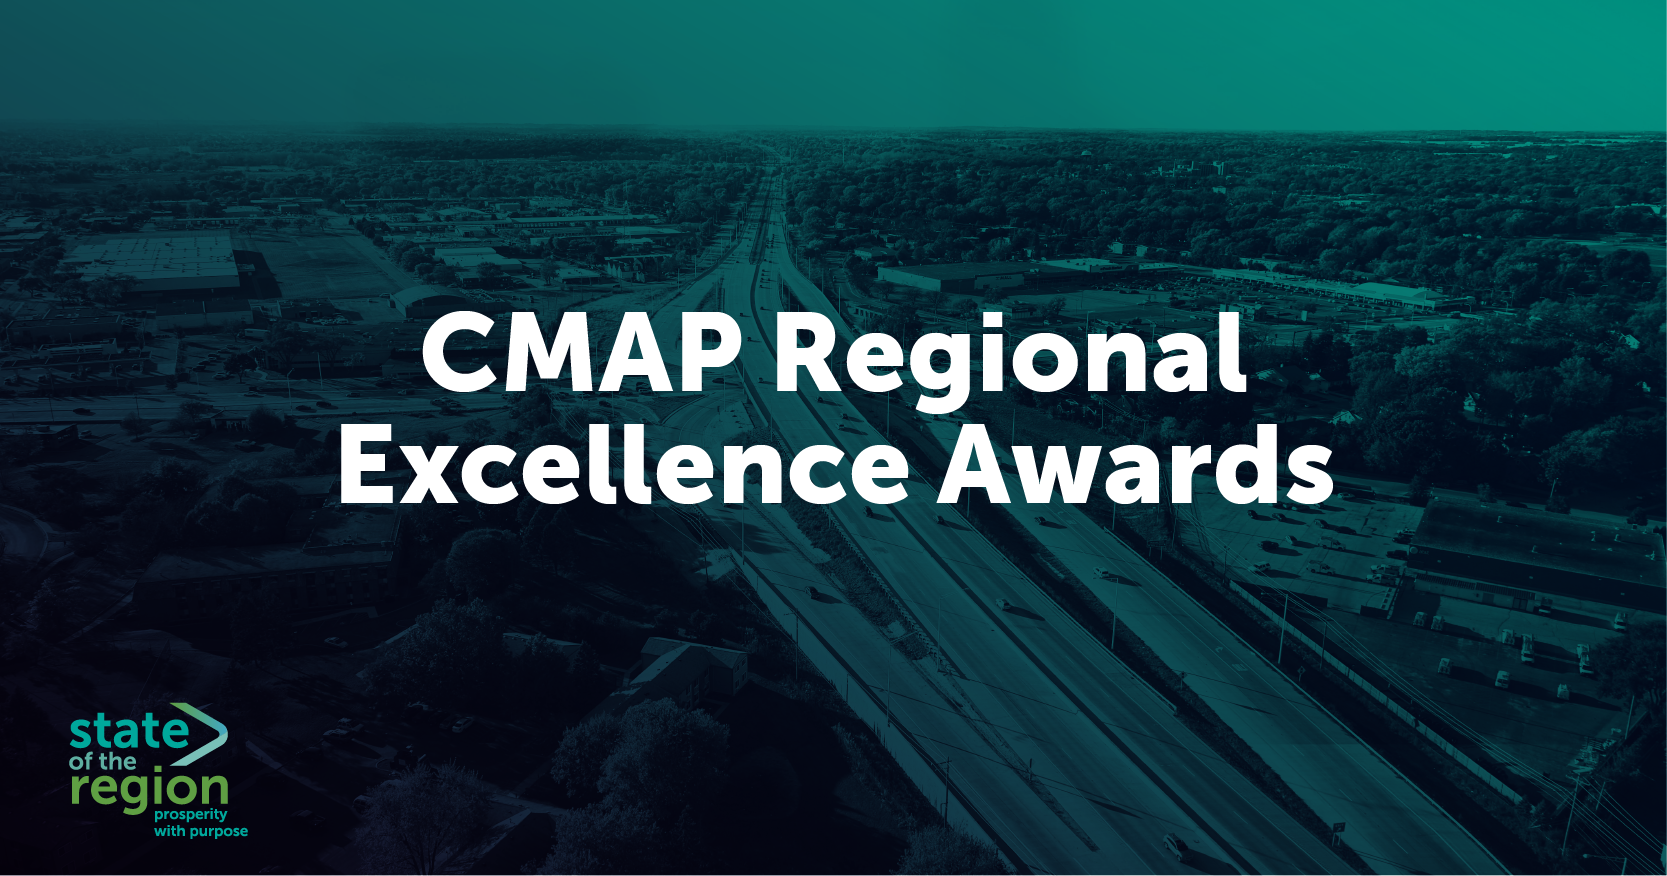 CMAP Regional Excellence Awards